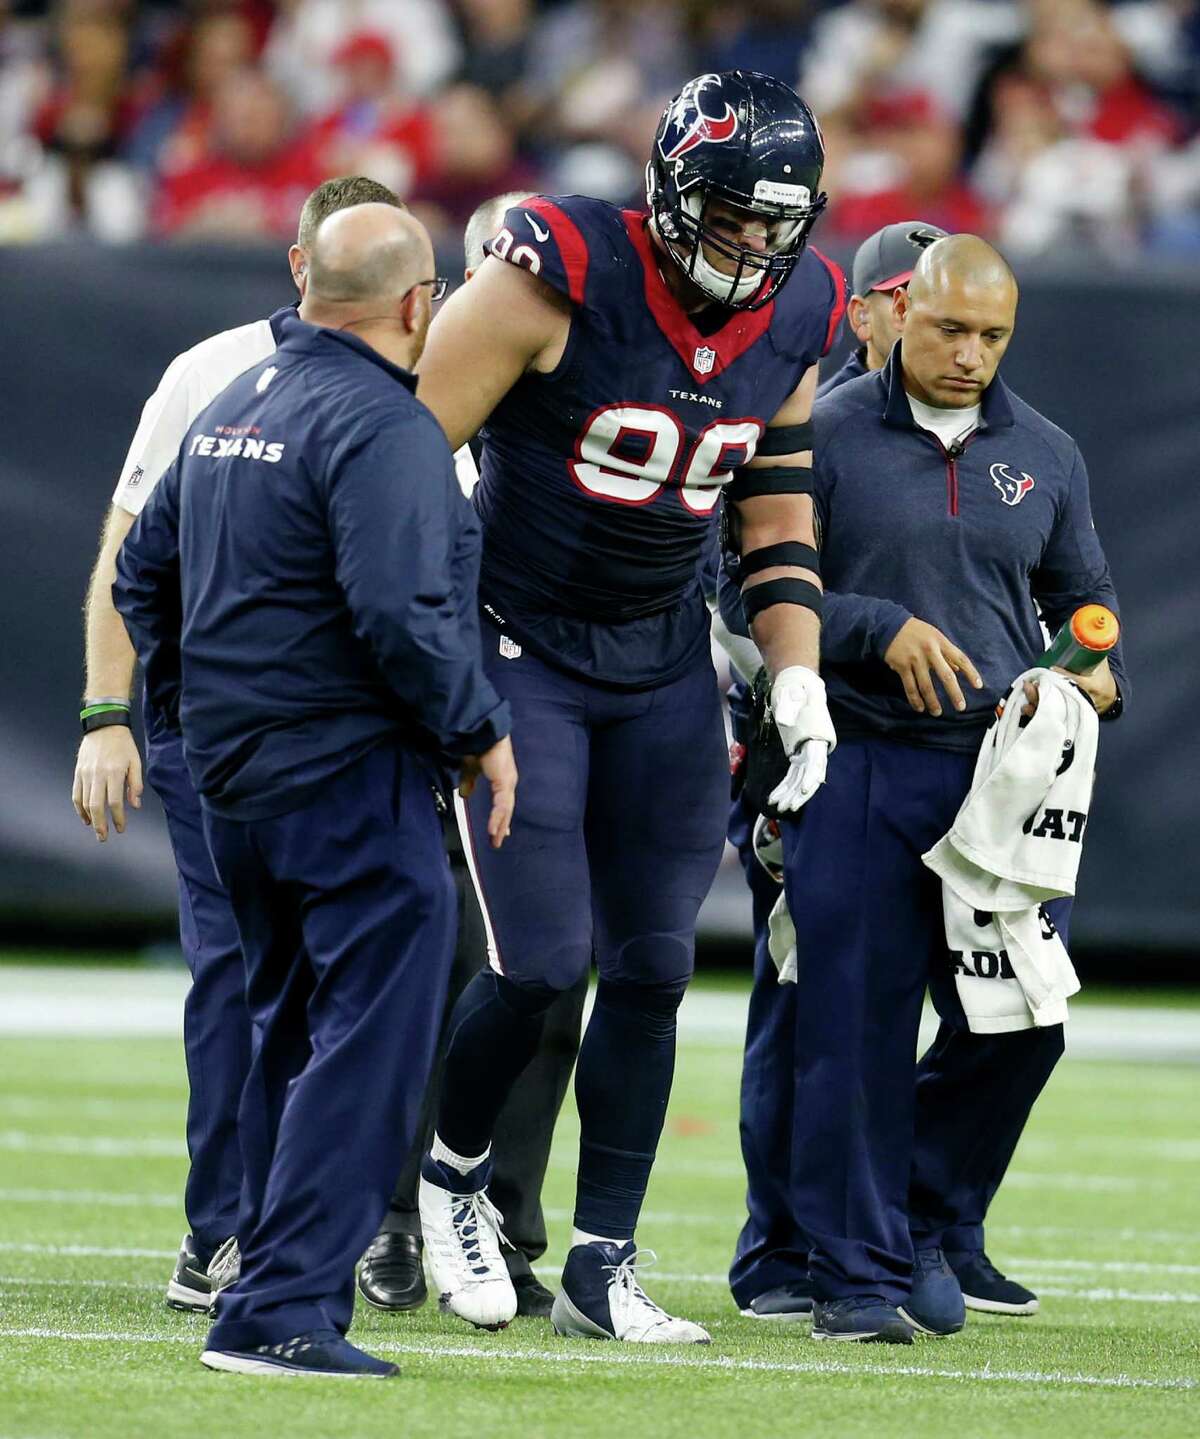 Houston Texans defensive end J.J. Watt (99) comes off the field after being injured during the third quarter of an AFC Wildcard playoff game at NRG Stadium on Saturday, Jan. 9, 2016, in Houston. ( Karen Warren / Houston Chronicle )